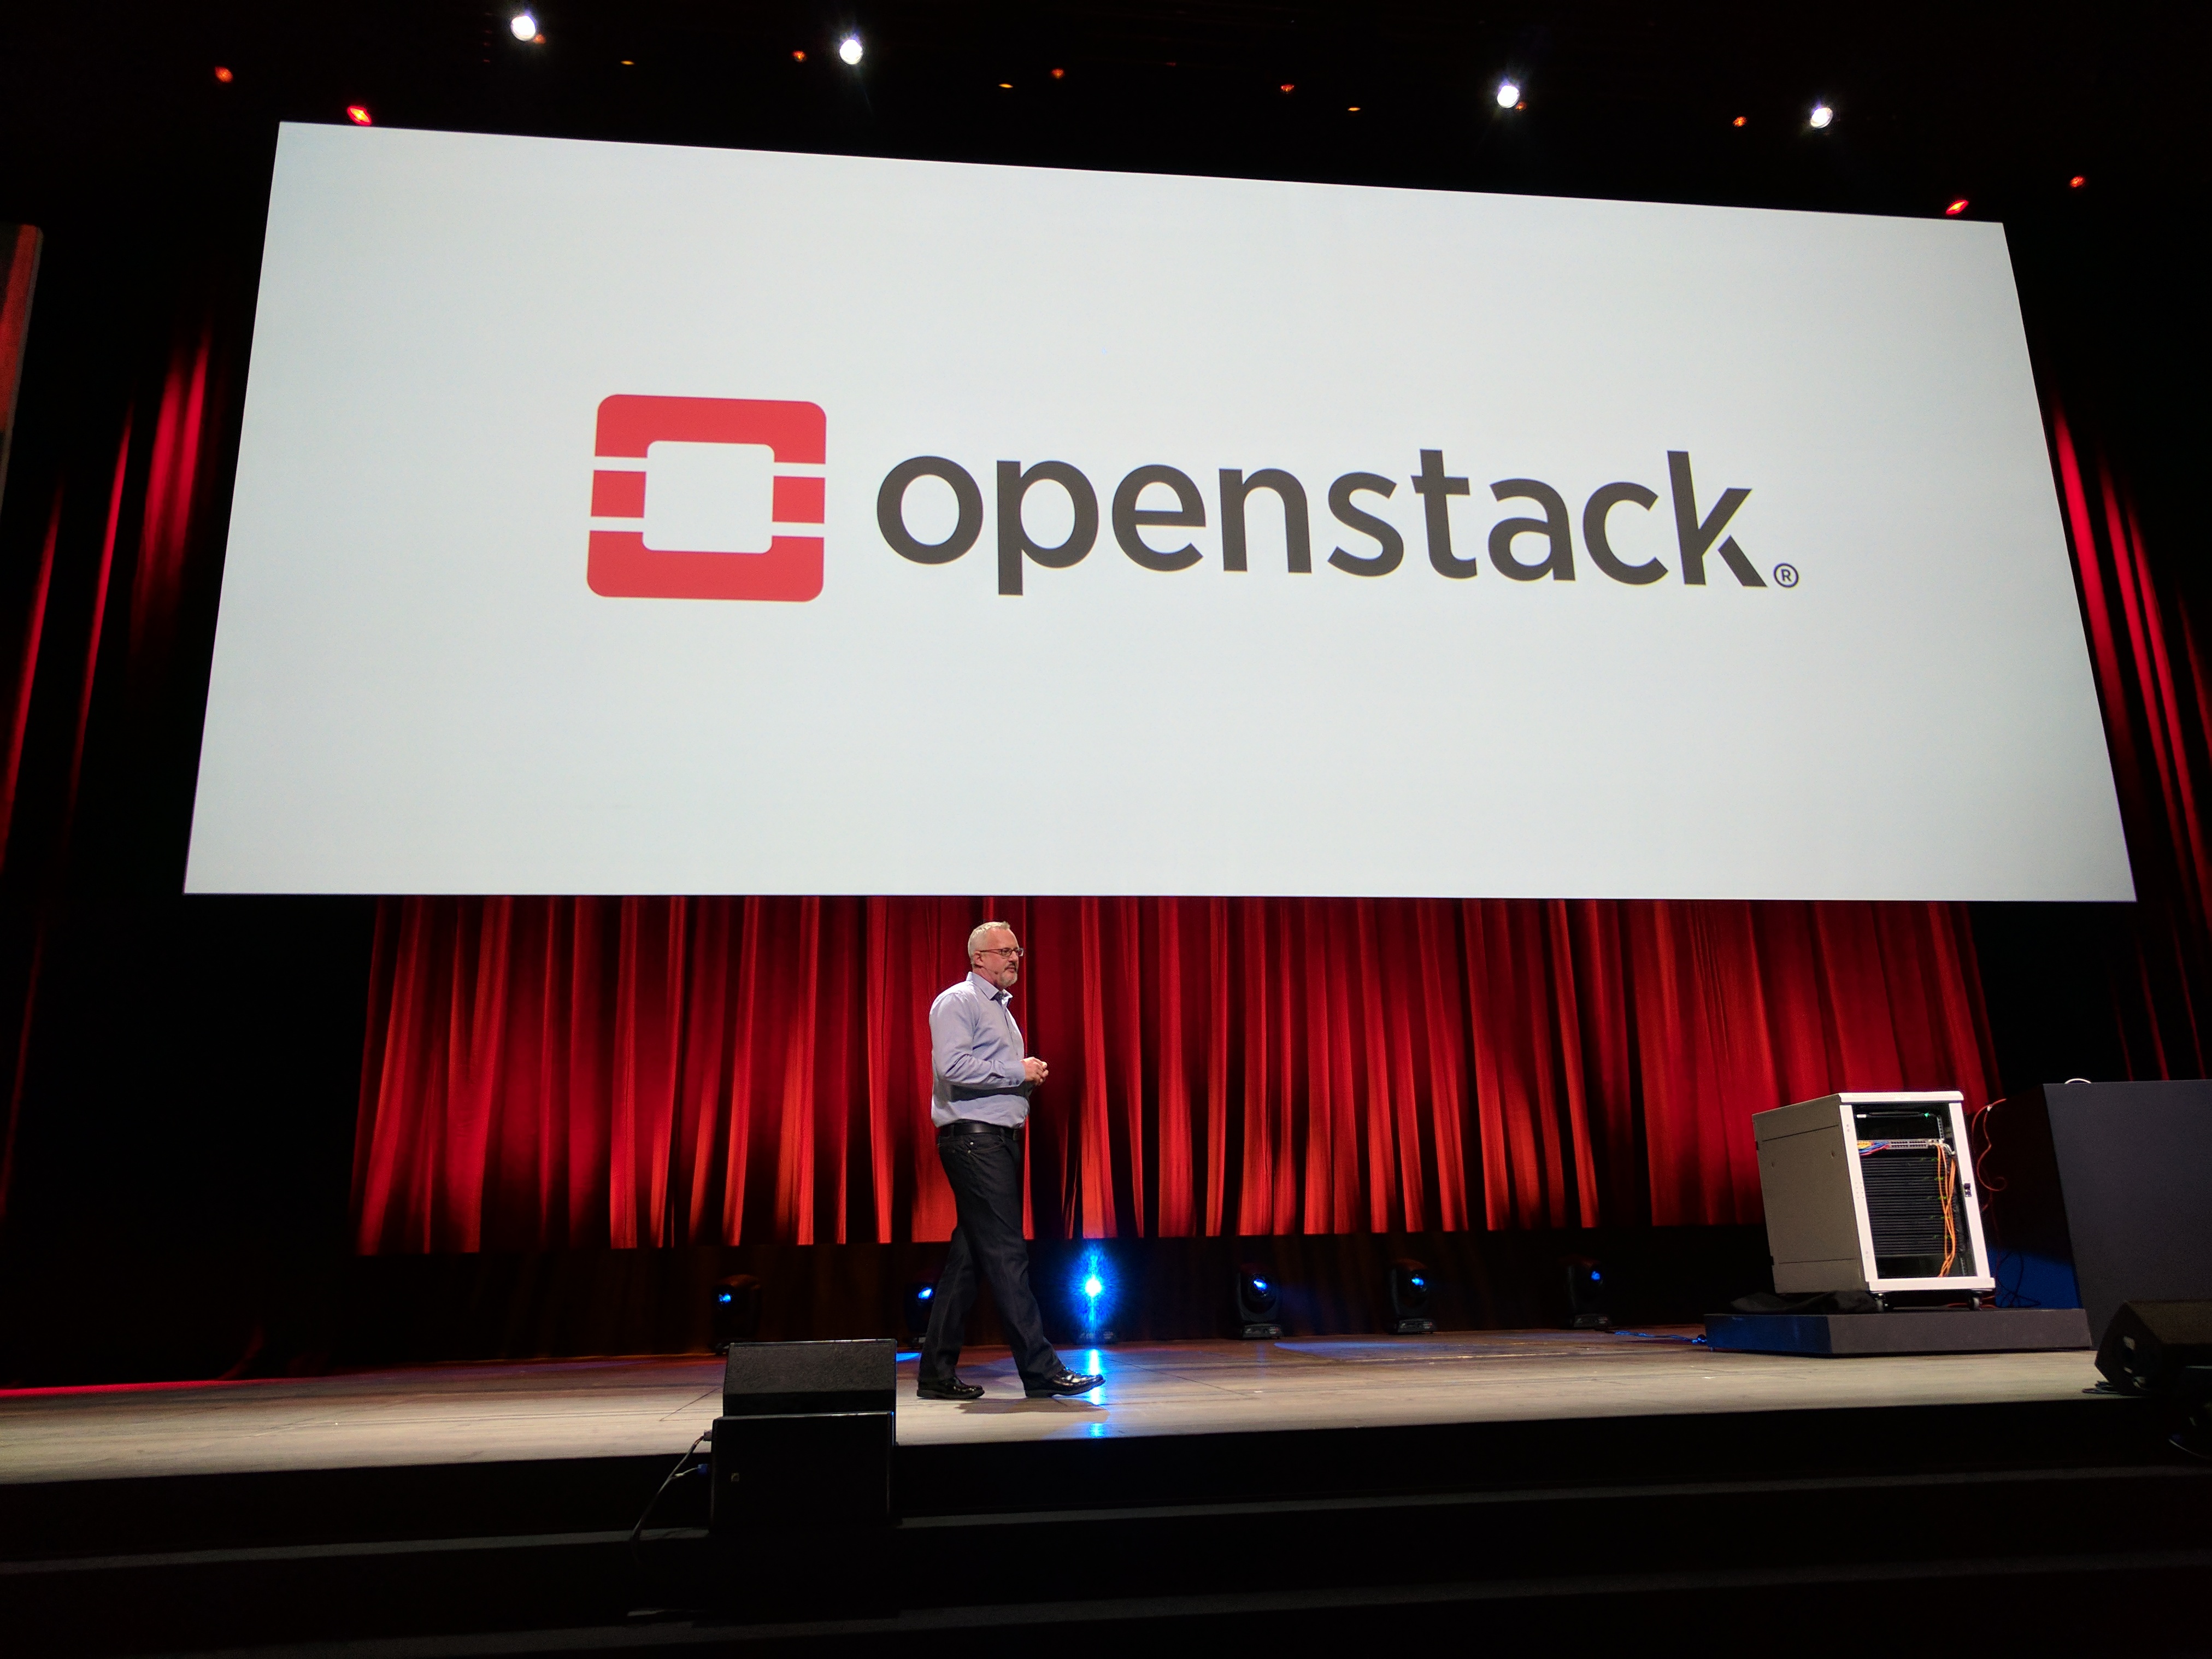 OpenStack improves support for AI workloads